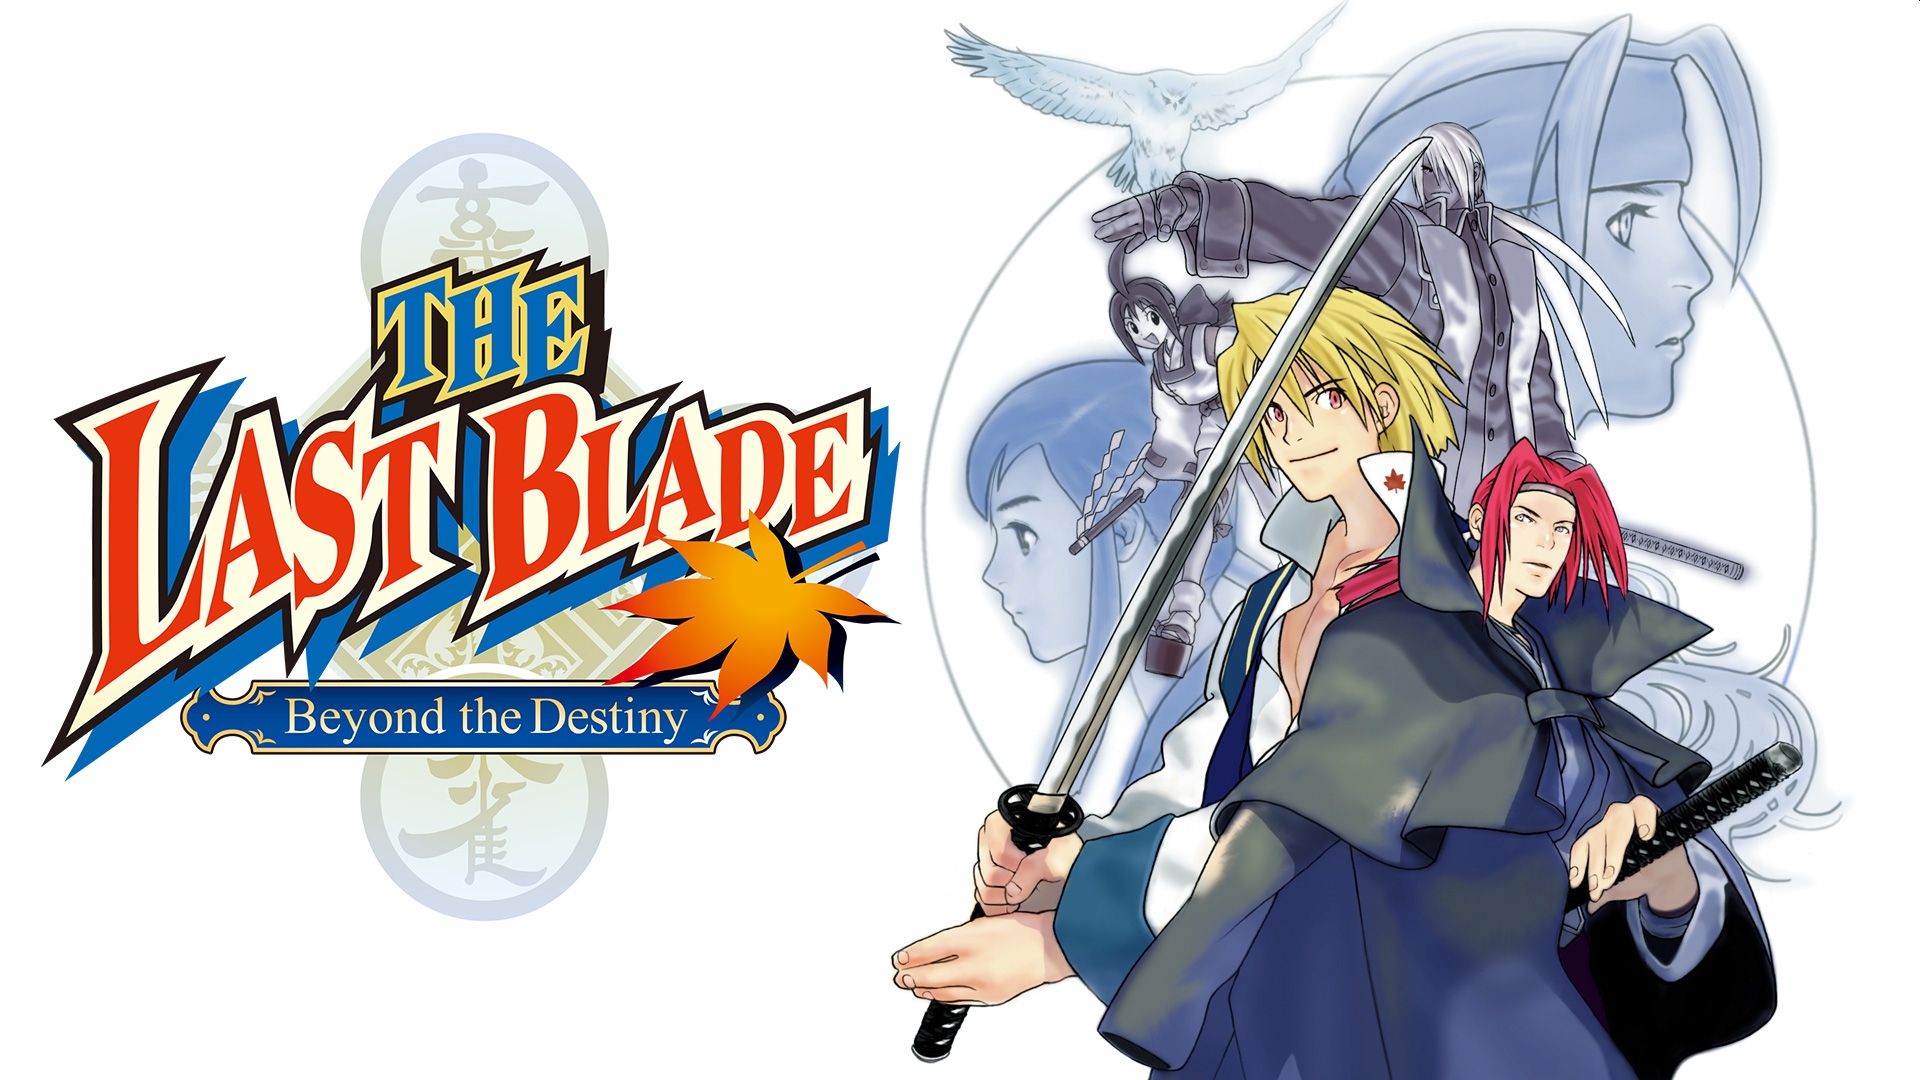 The Last Blade: Beyond the Destiny Nintendo Switch Port Now Available